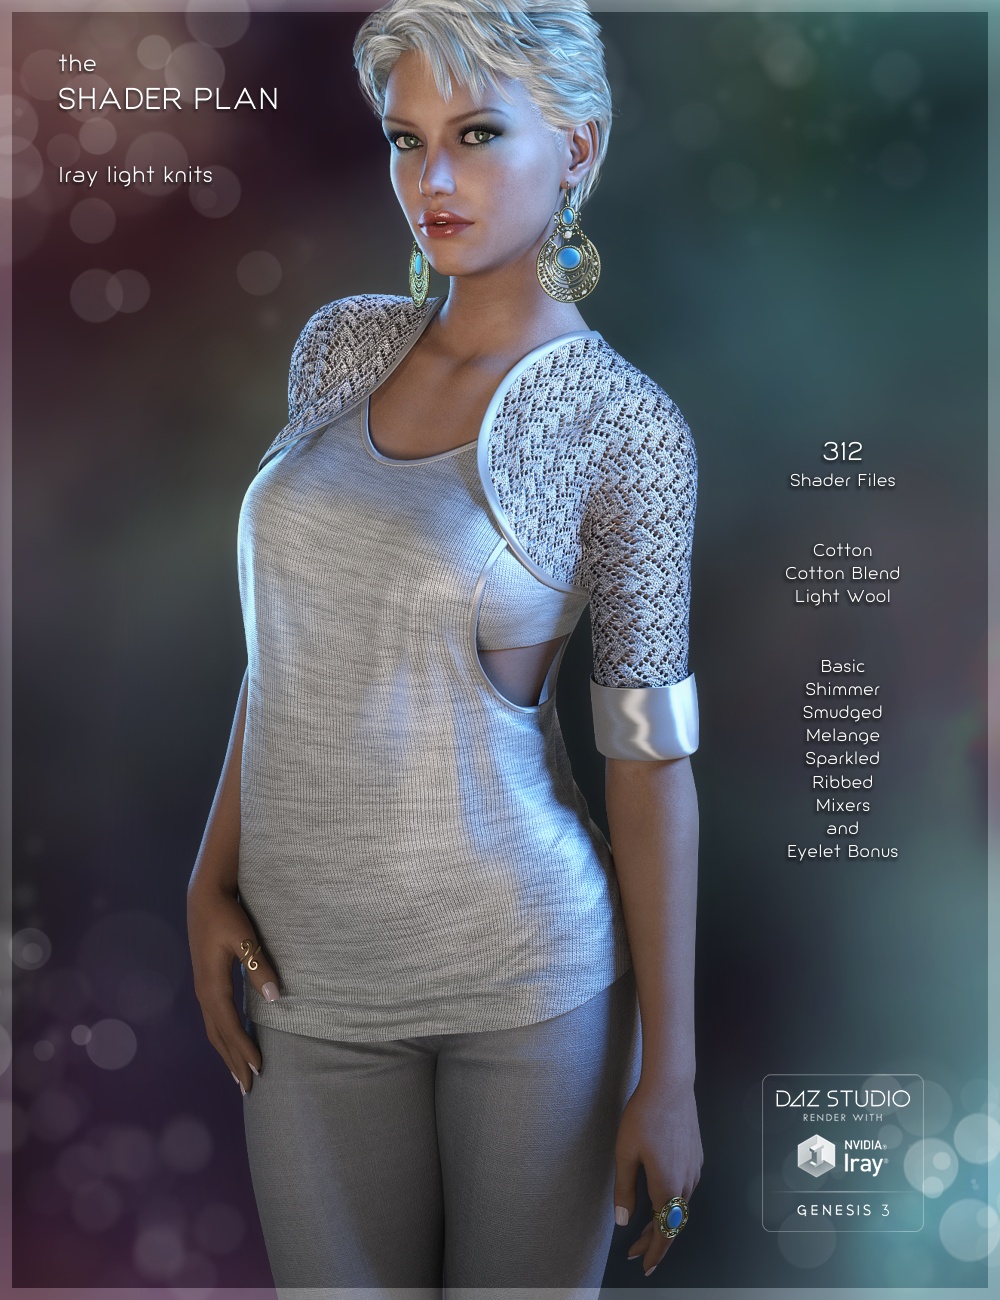 The Shader Plan - Light Knits for Iray by: Fabiana, 3D Models by Daz 3D